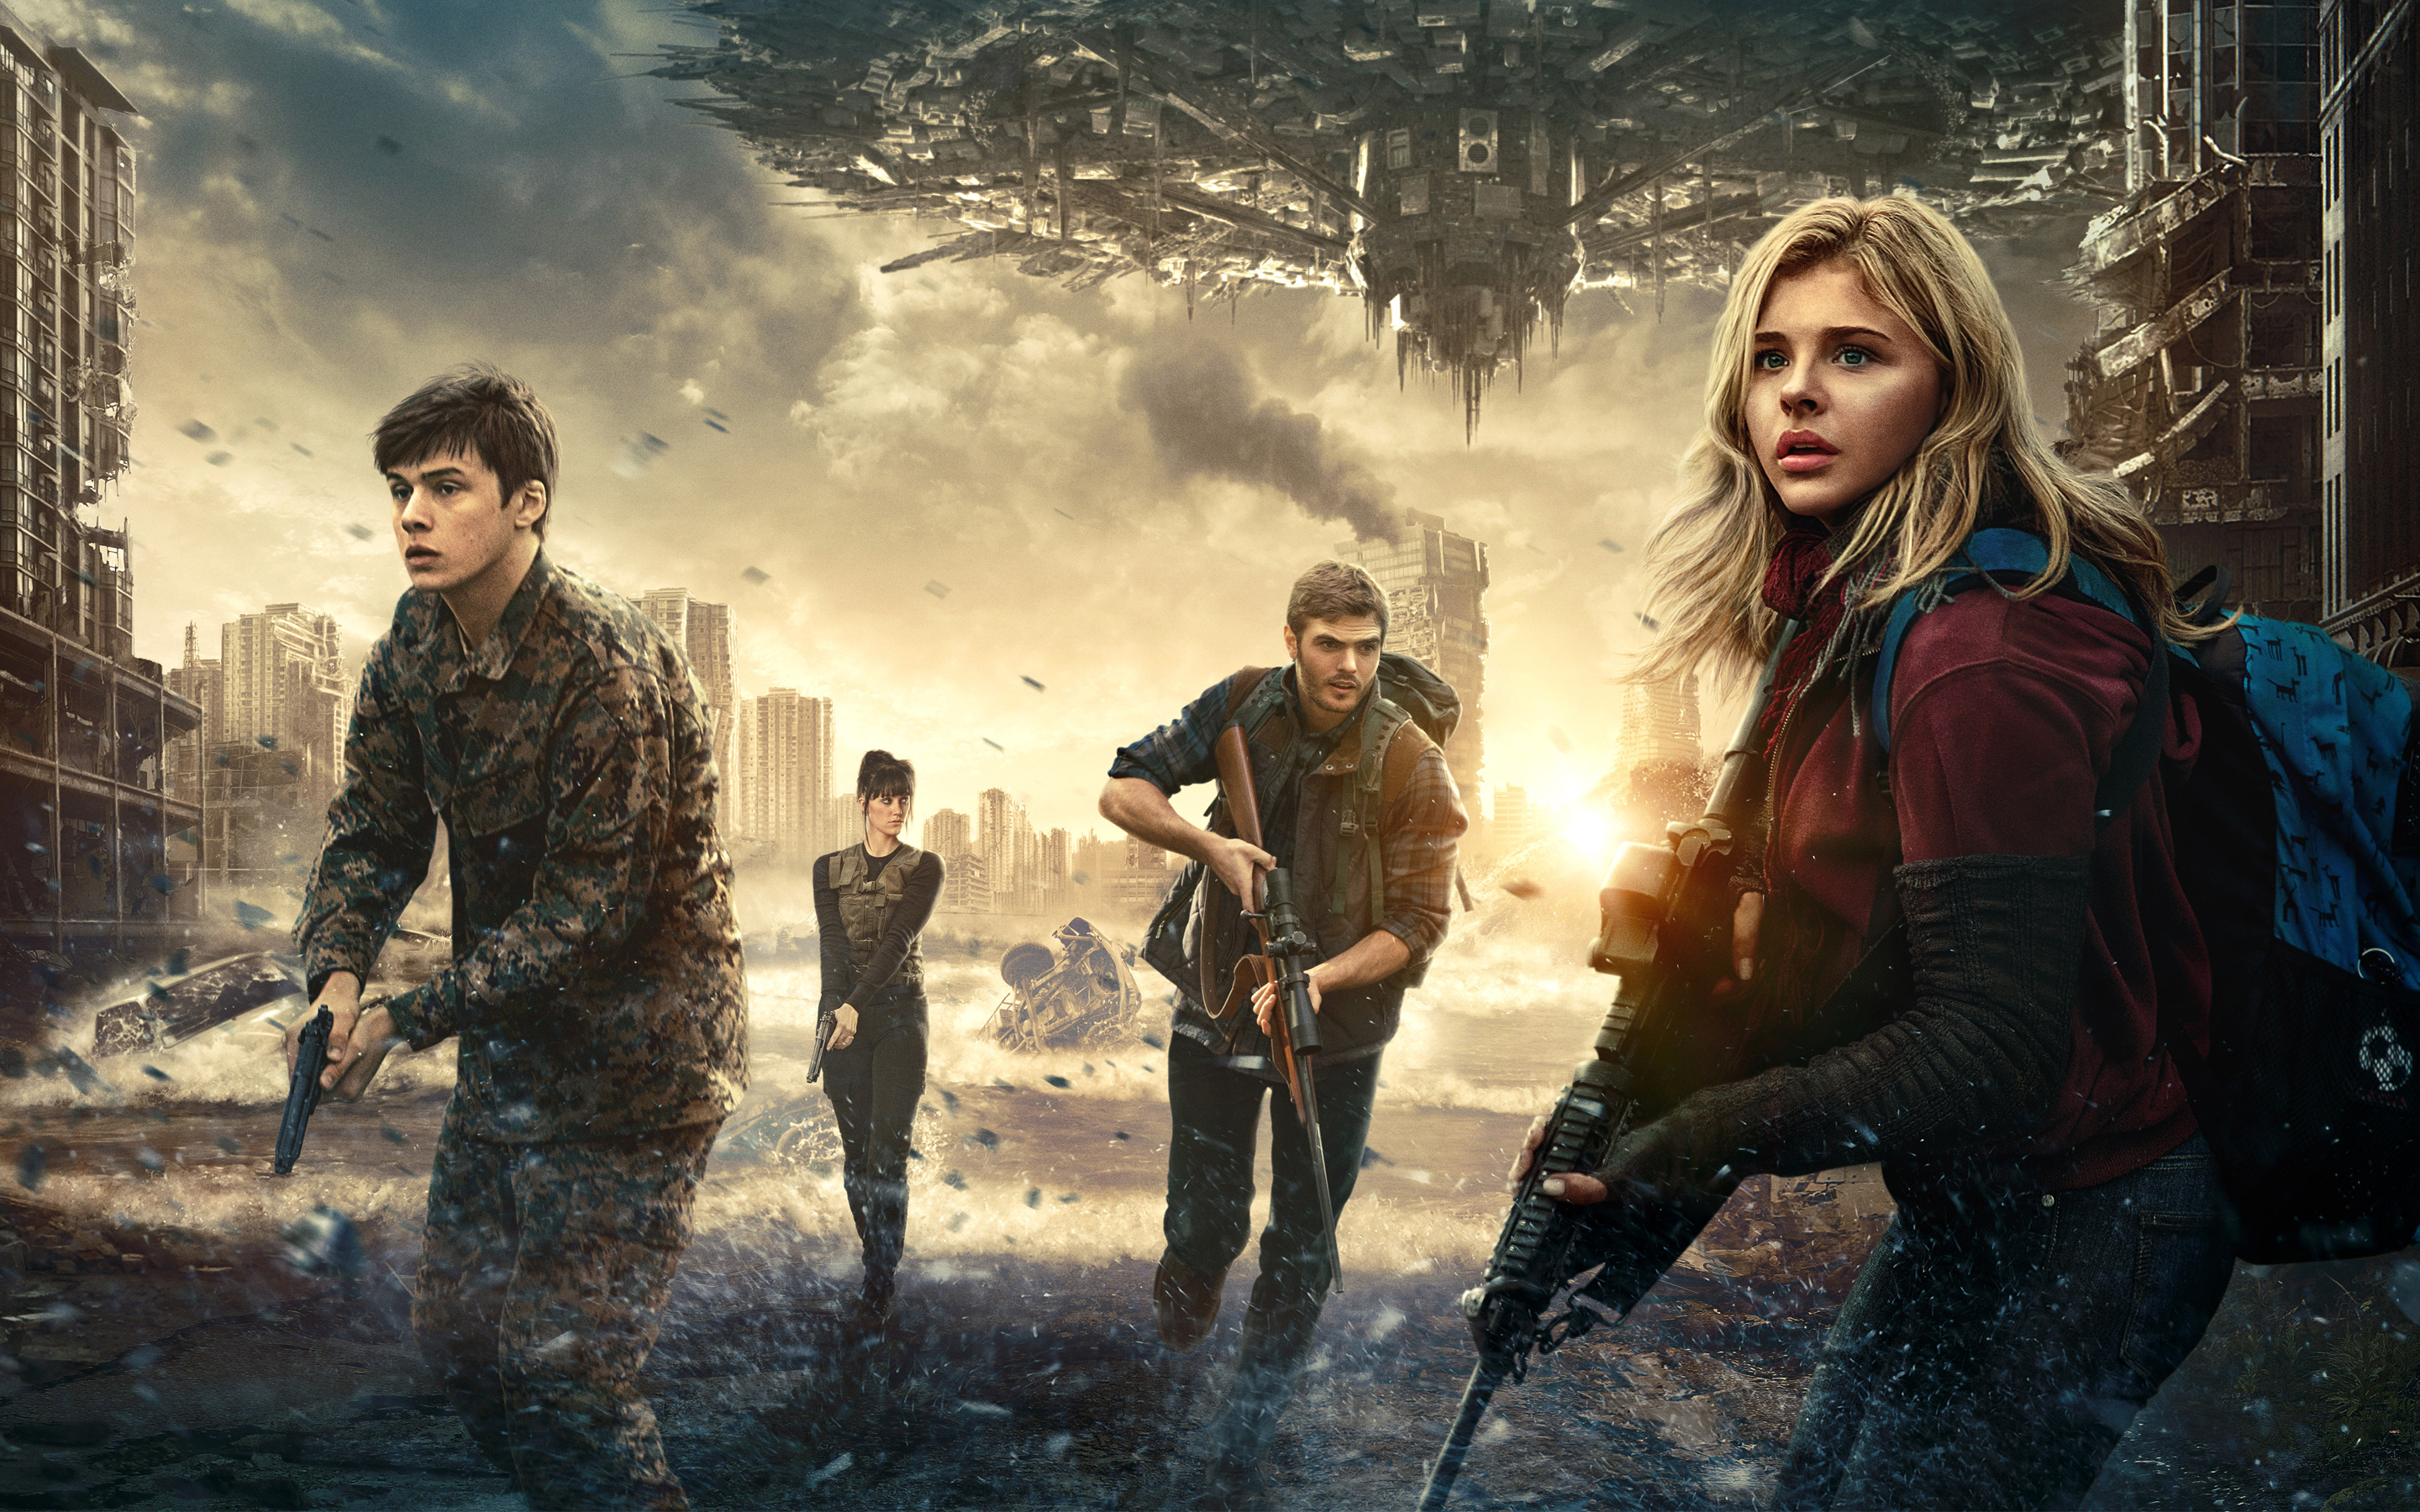 THE 5TH WAVE Delivers an Assault of Silly Hokum